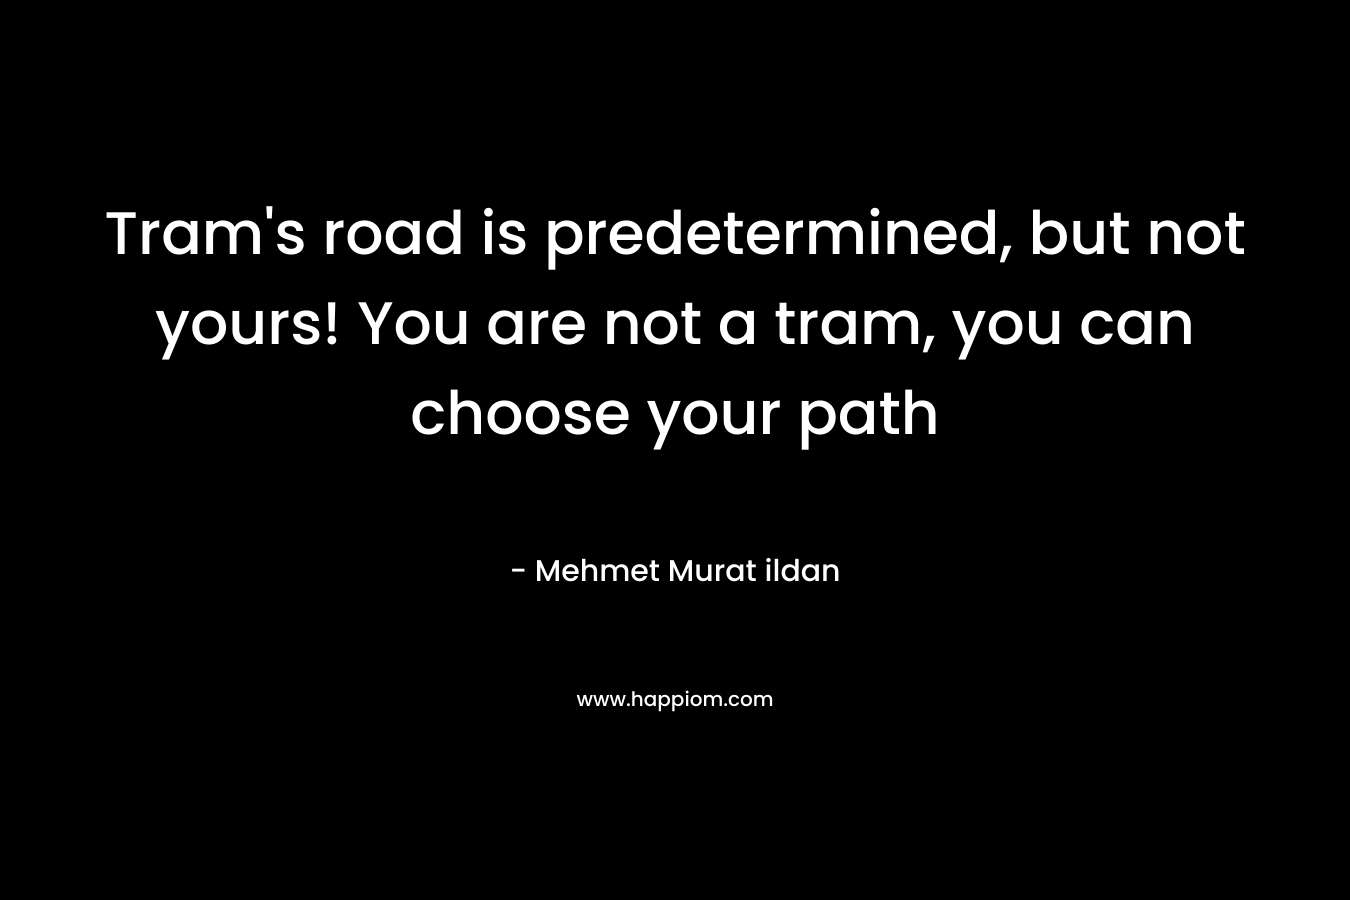 Tram’s road is predetermined, but not yours! You are not a tram, you can choose your path – Mehmet Murat ildan